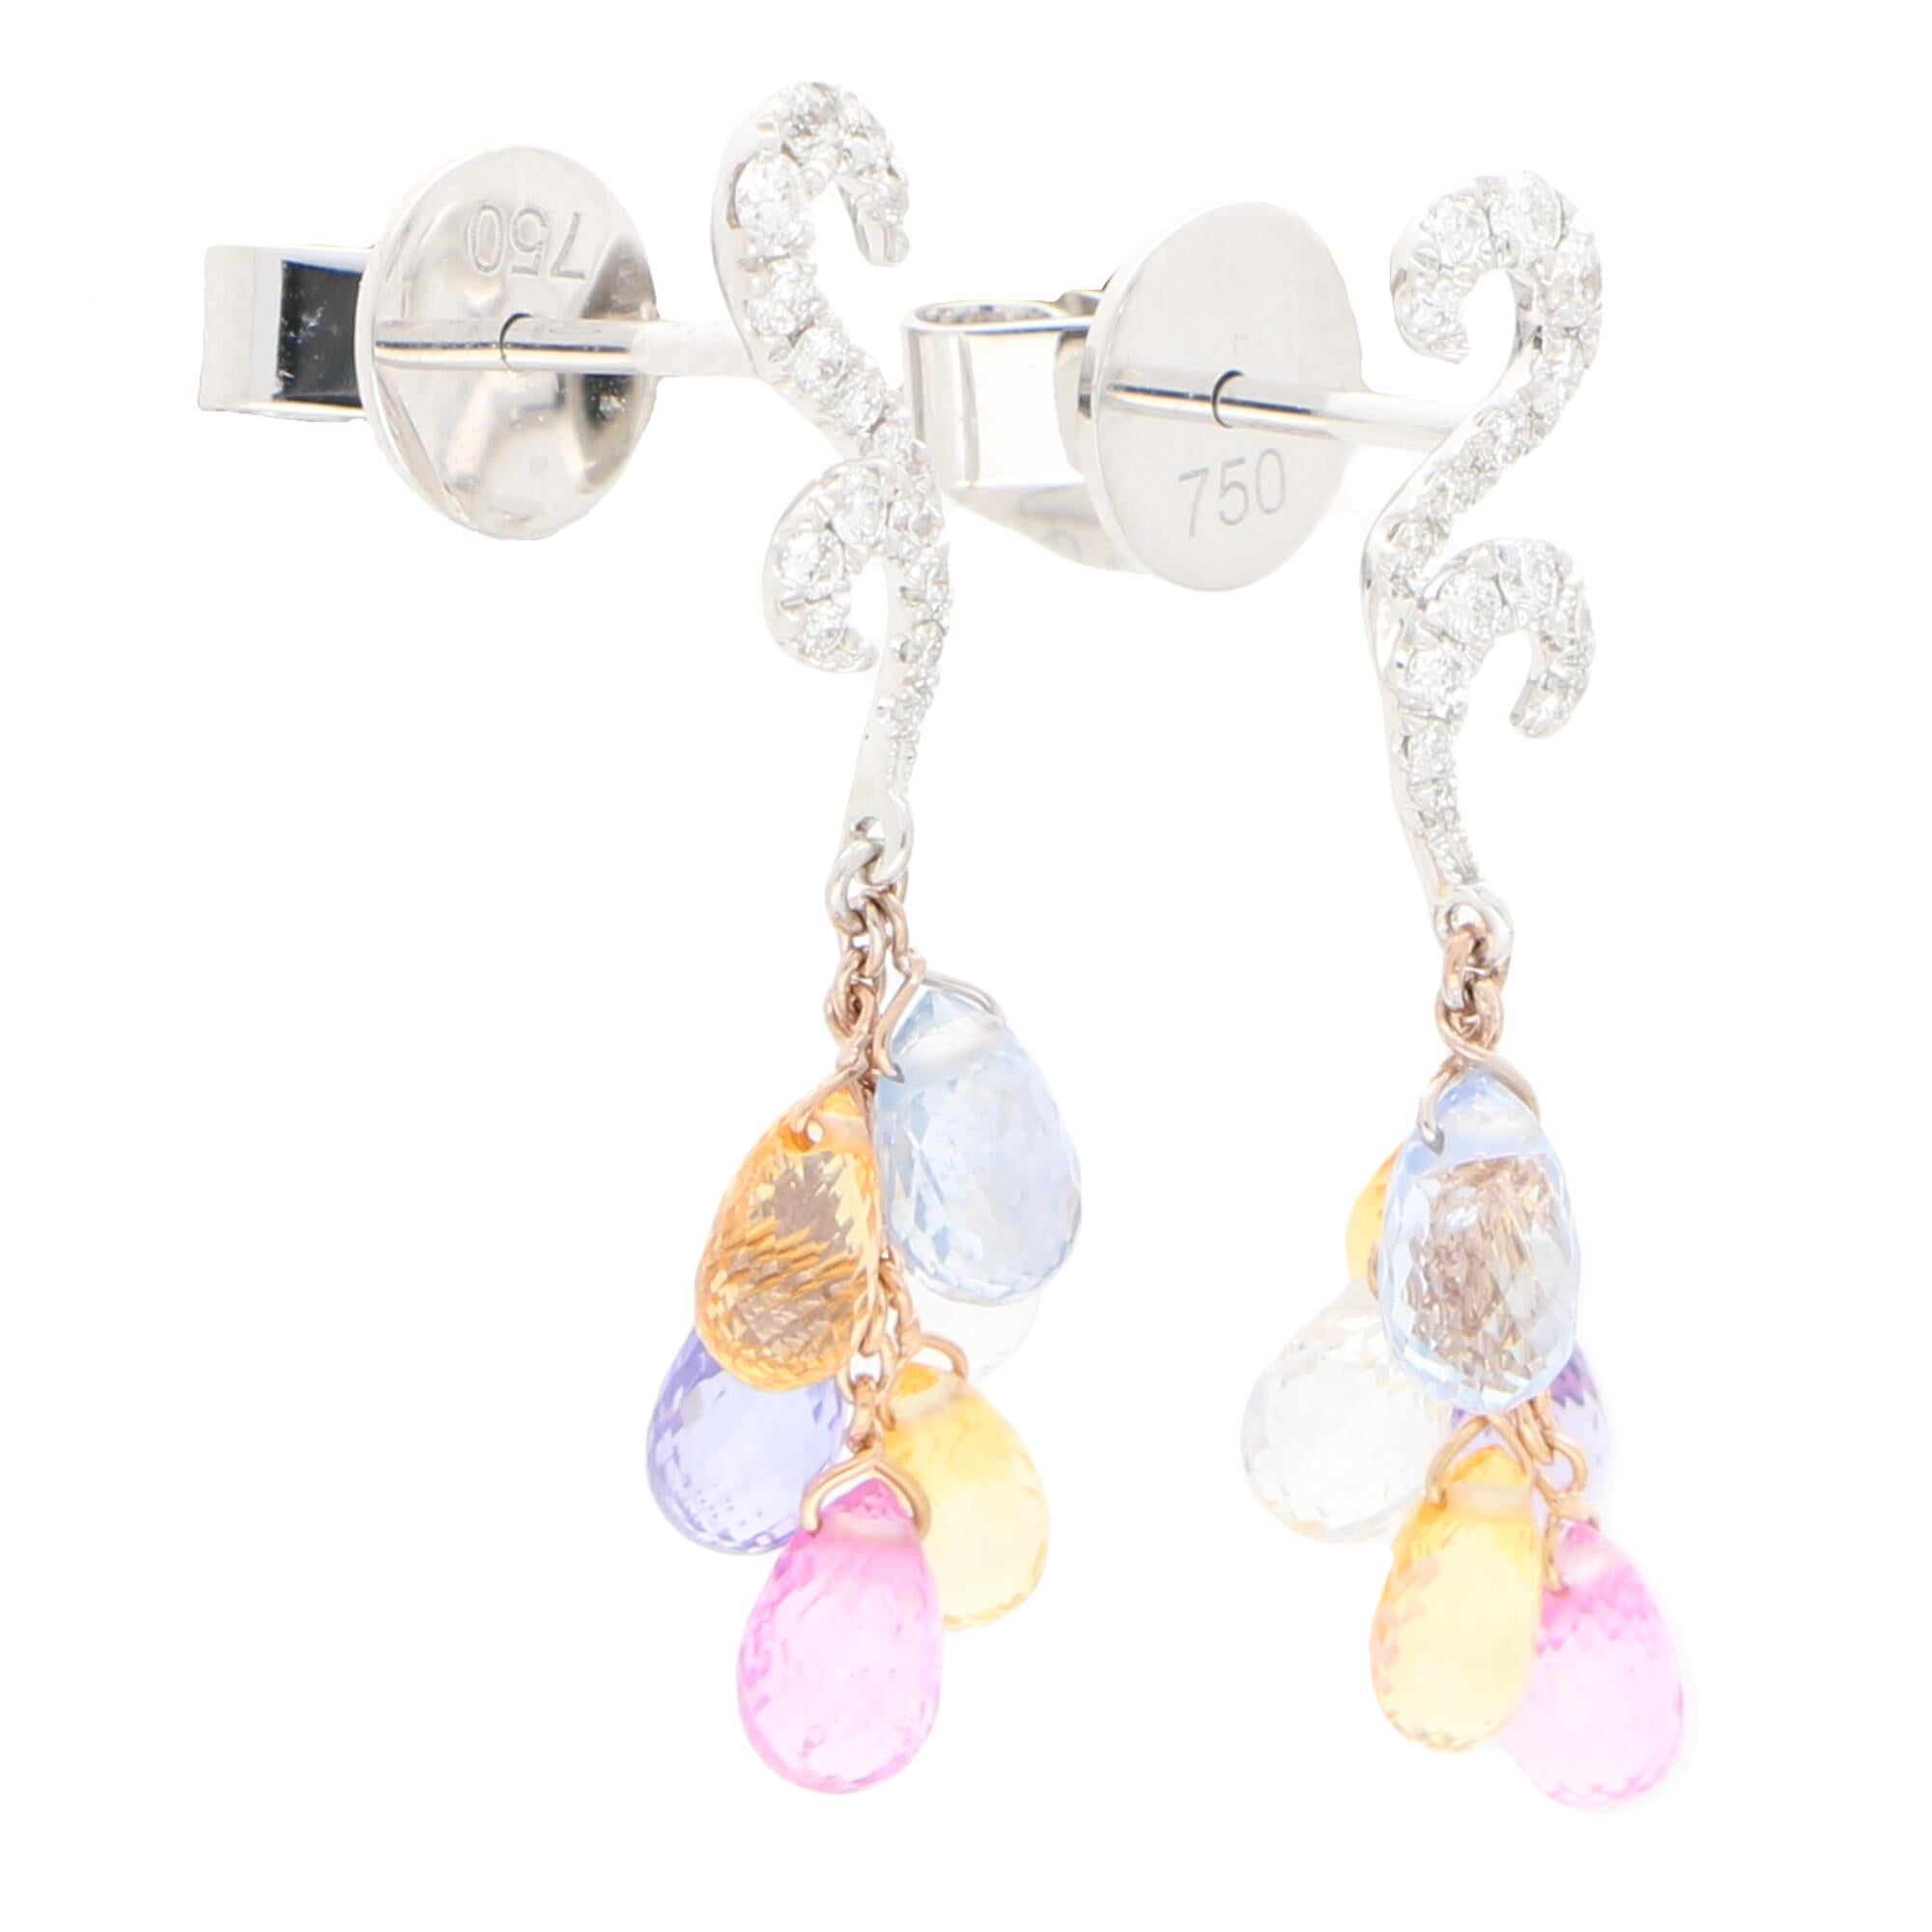 Modern Pastel Rainbow Sapphire and Diamond Drop Earrings Set in 18k White and Rose Gold